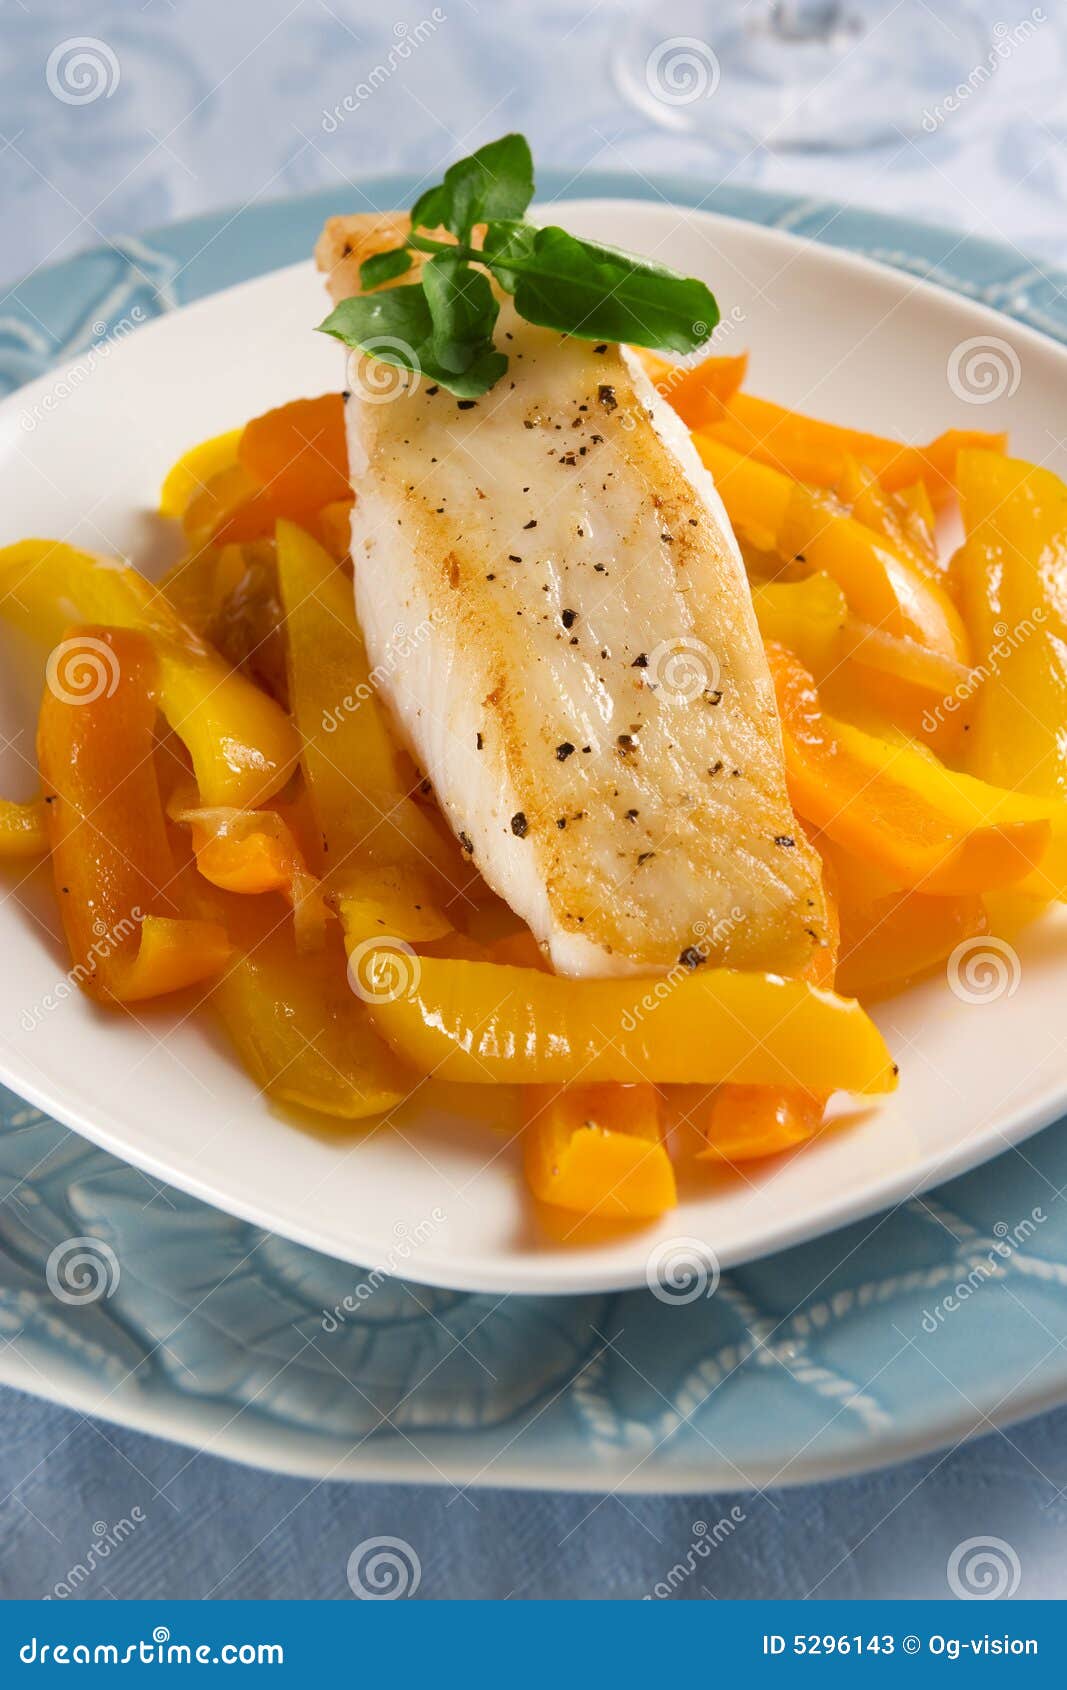 Sea bass with pepper stock image. Image of seared, prepared - 5296143